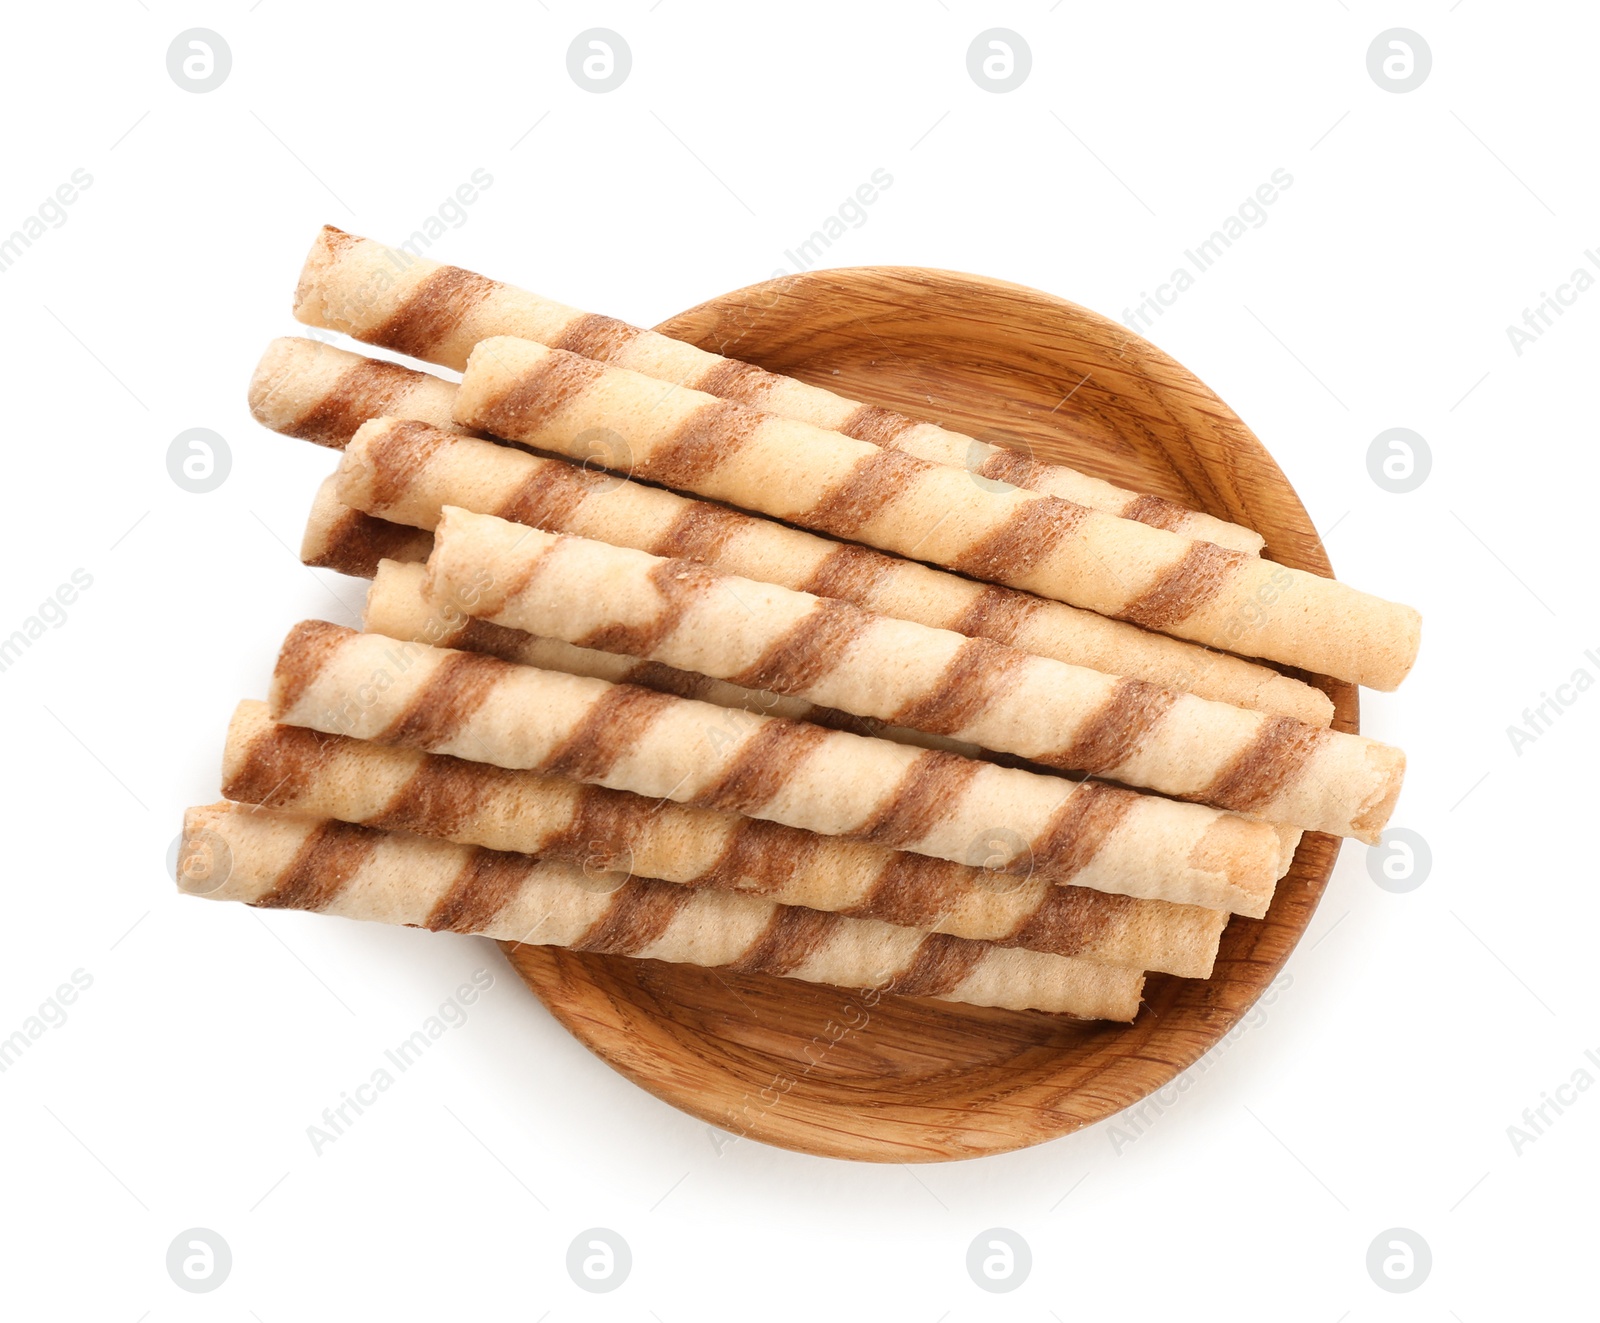 Photo of Plate with tasty wafer roll sticks on white background, top view. Crispy food